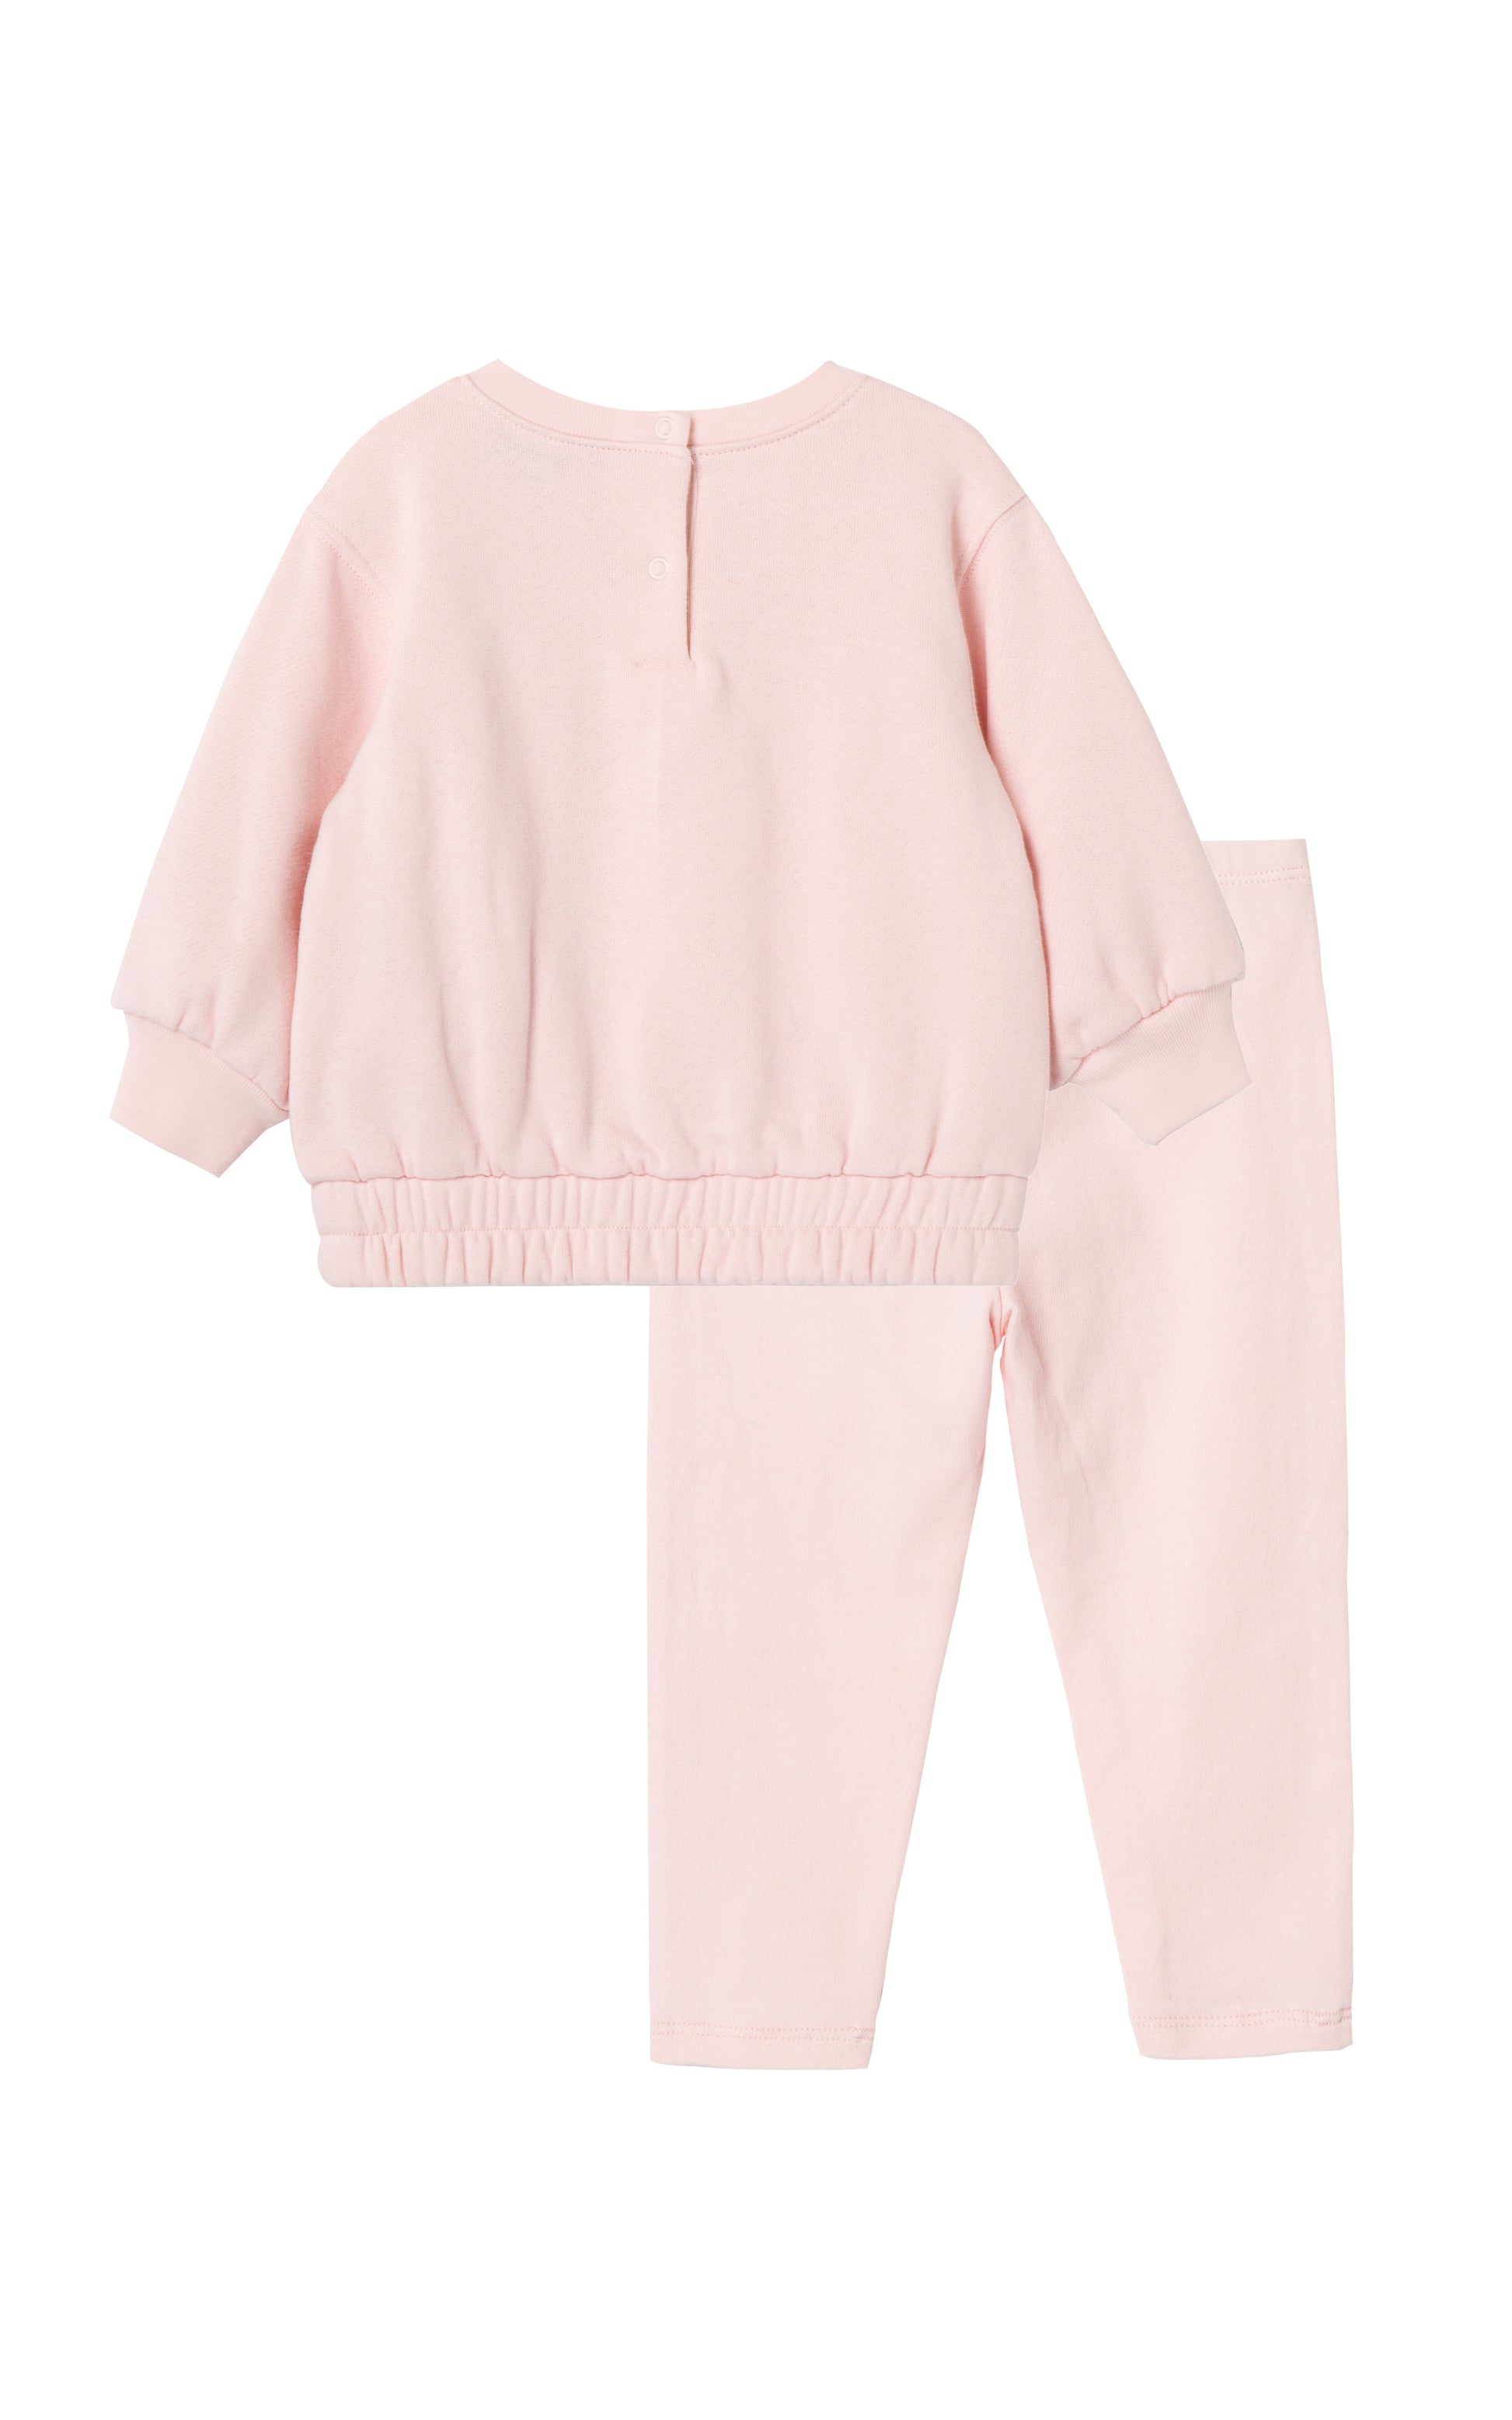 Back view of pink fleece sweatshirt set with a bow 